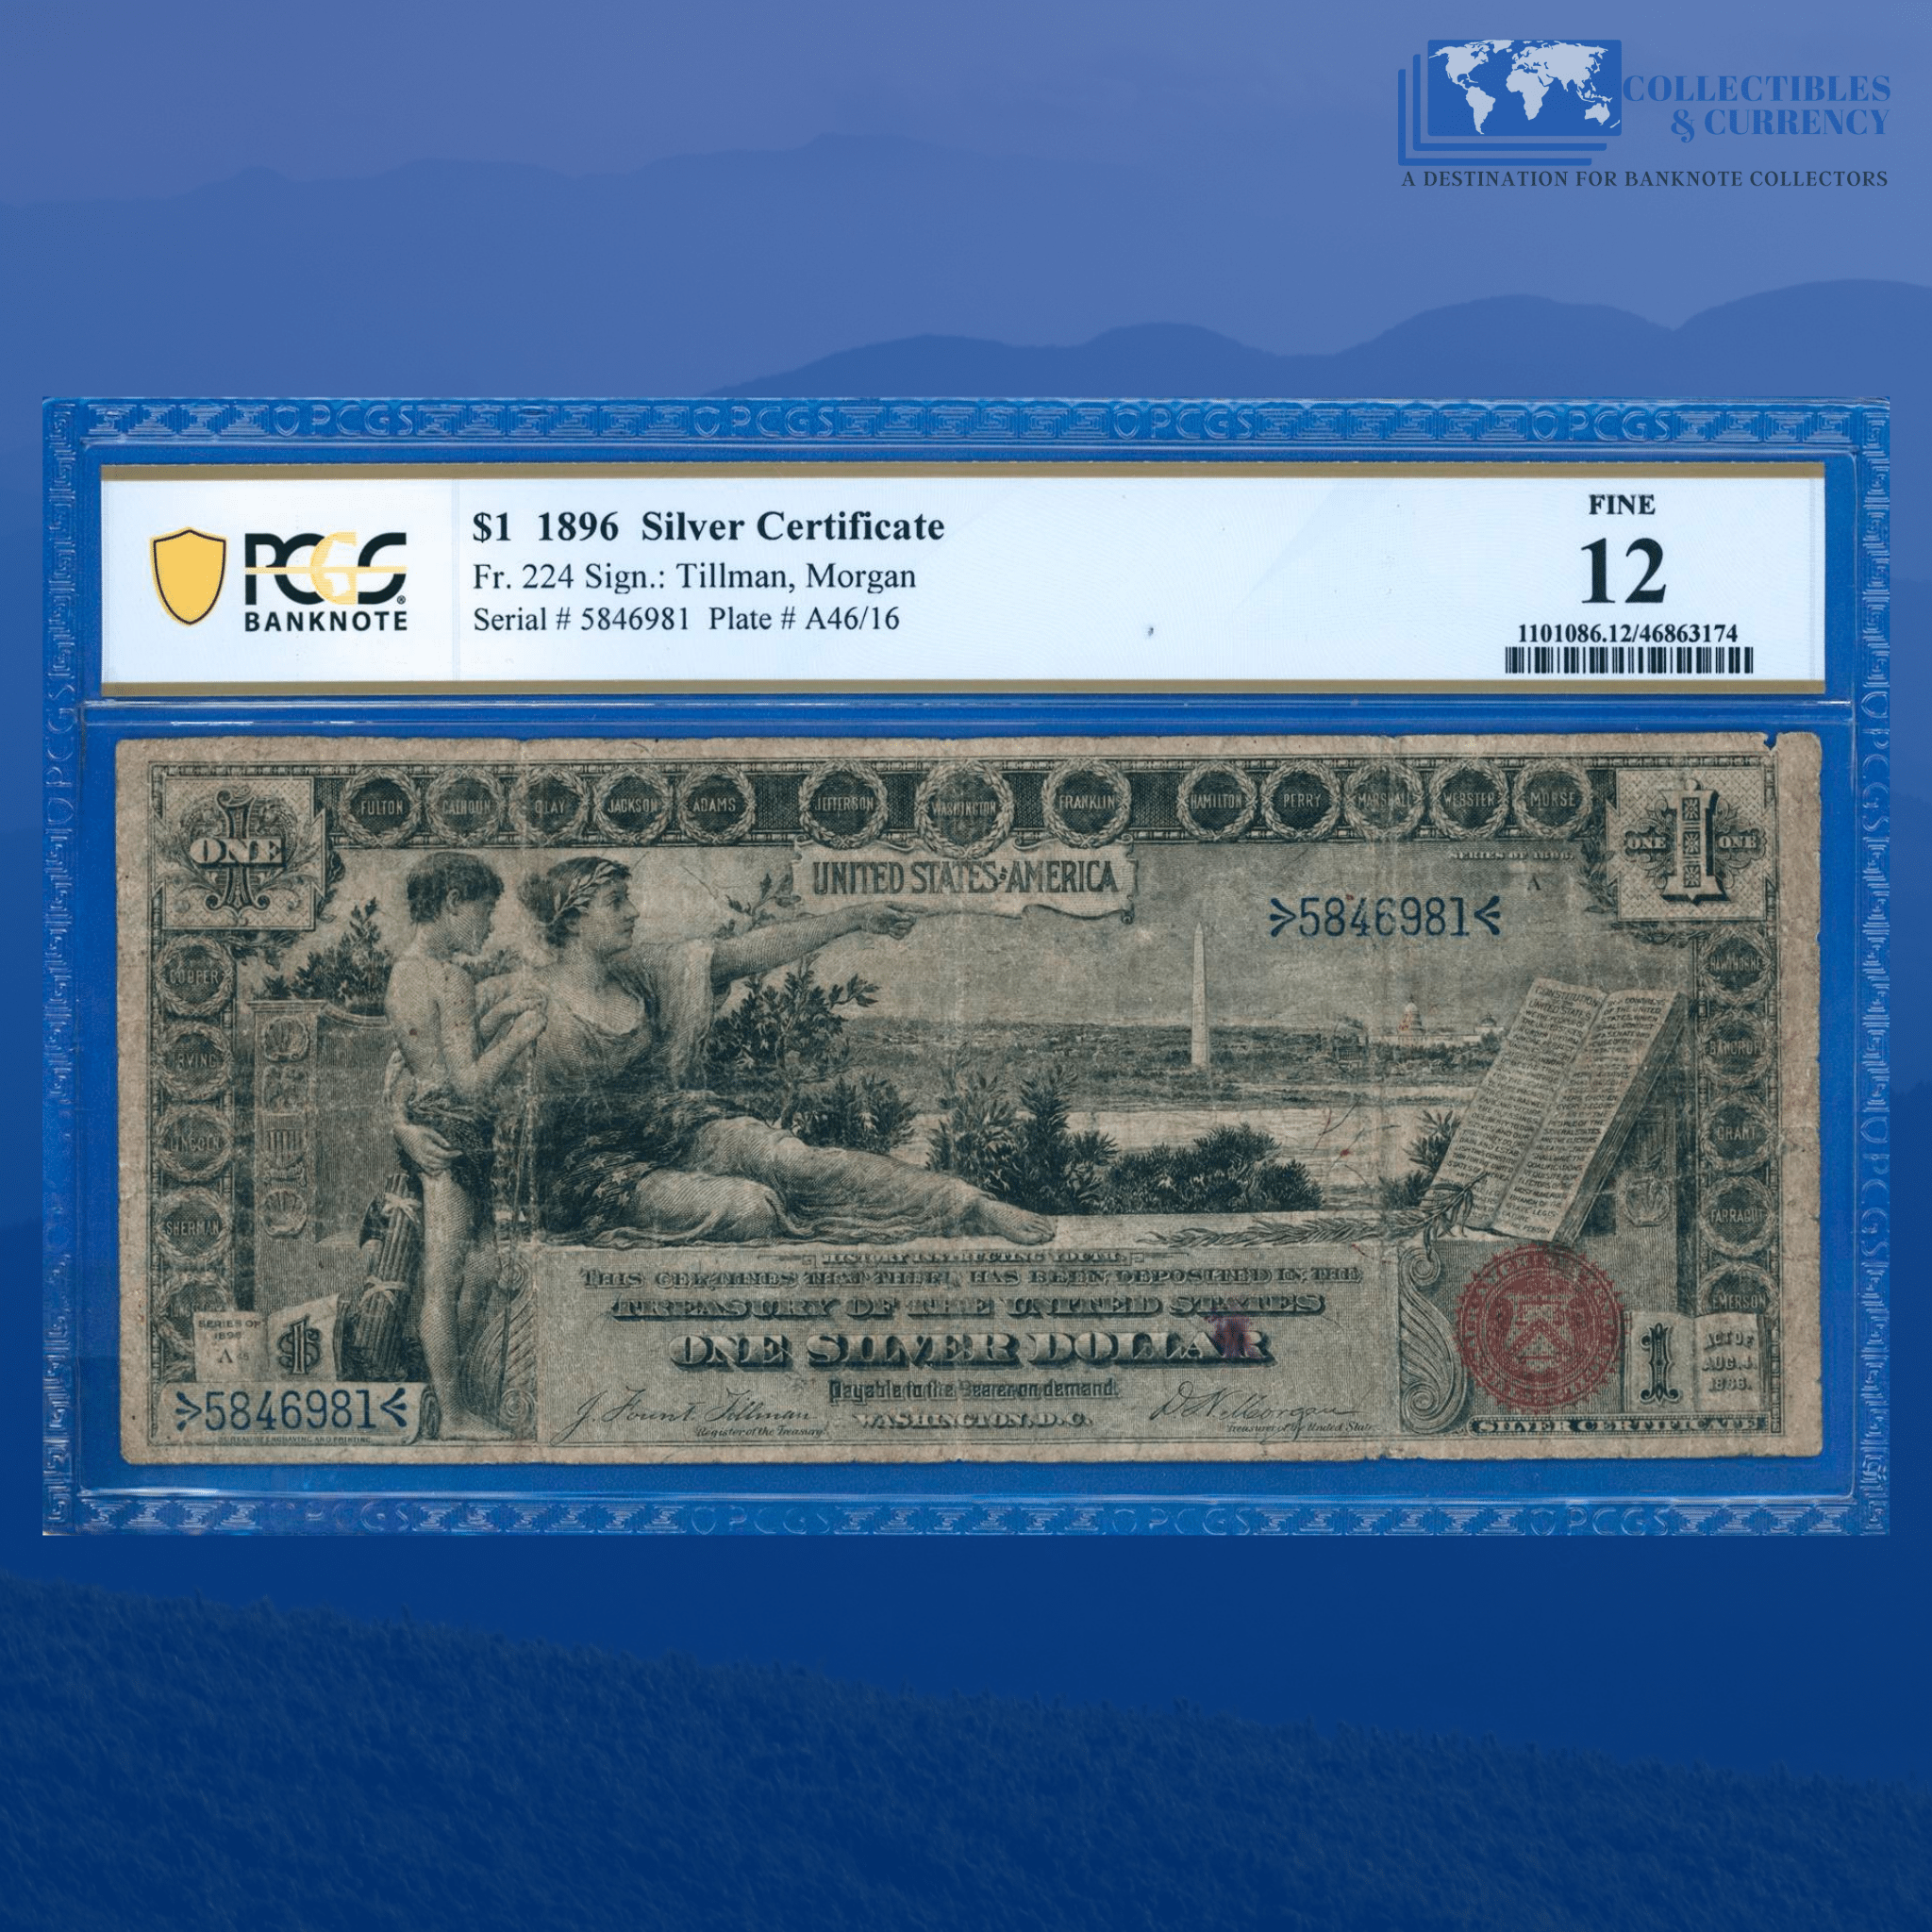 1 Dollar, Silver Certificate, United States, 1896